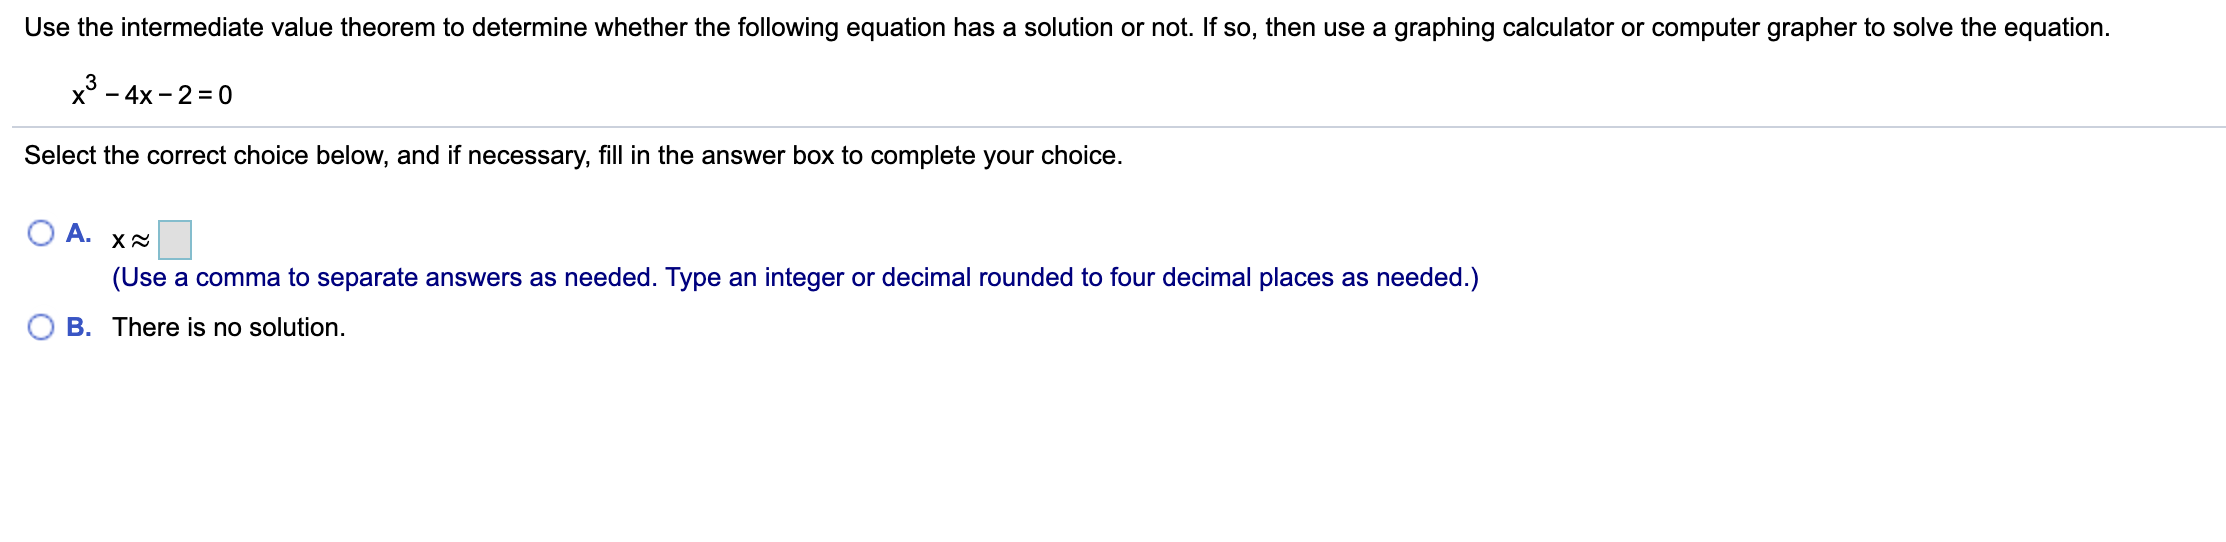 Use the intermediate value theorem to determine whether the following equation has a solution or not. If so, then use a graphing calculator or computer grapher to solve the equation.
x° - 4x - 2 = 0
Select the correct choice below, and if necessary, fill in the answer box to complete your choice.
A.
(Use a comma to separate answers as needed. Type an integer or decimal rounded to four decimal places as needed.)
B. There is no solution.
